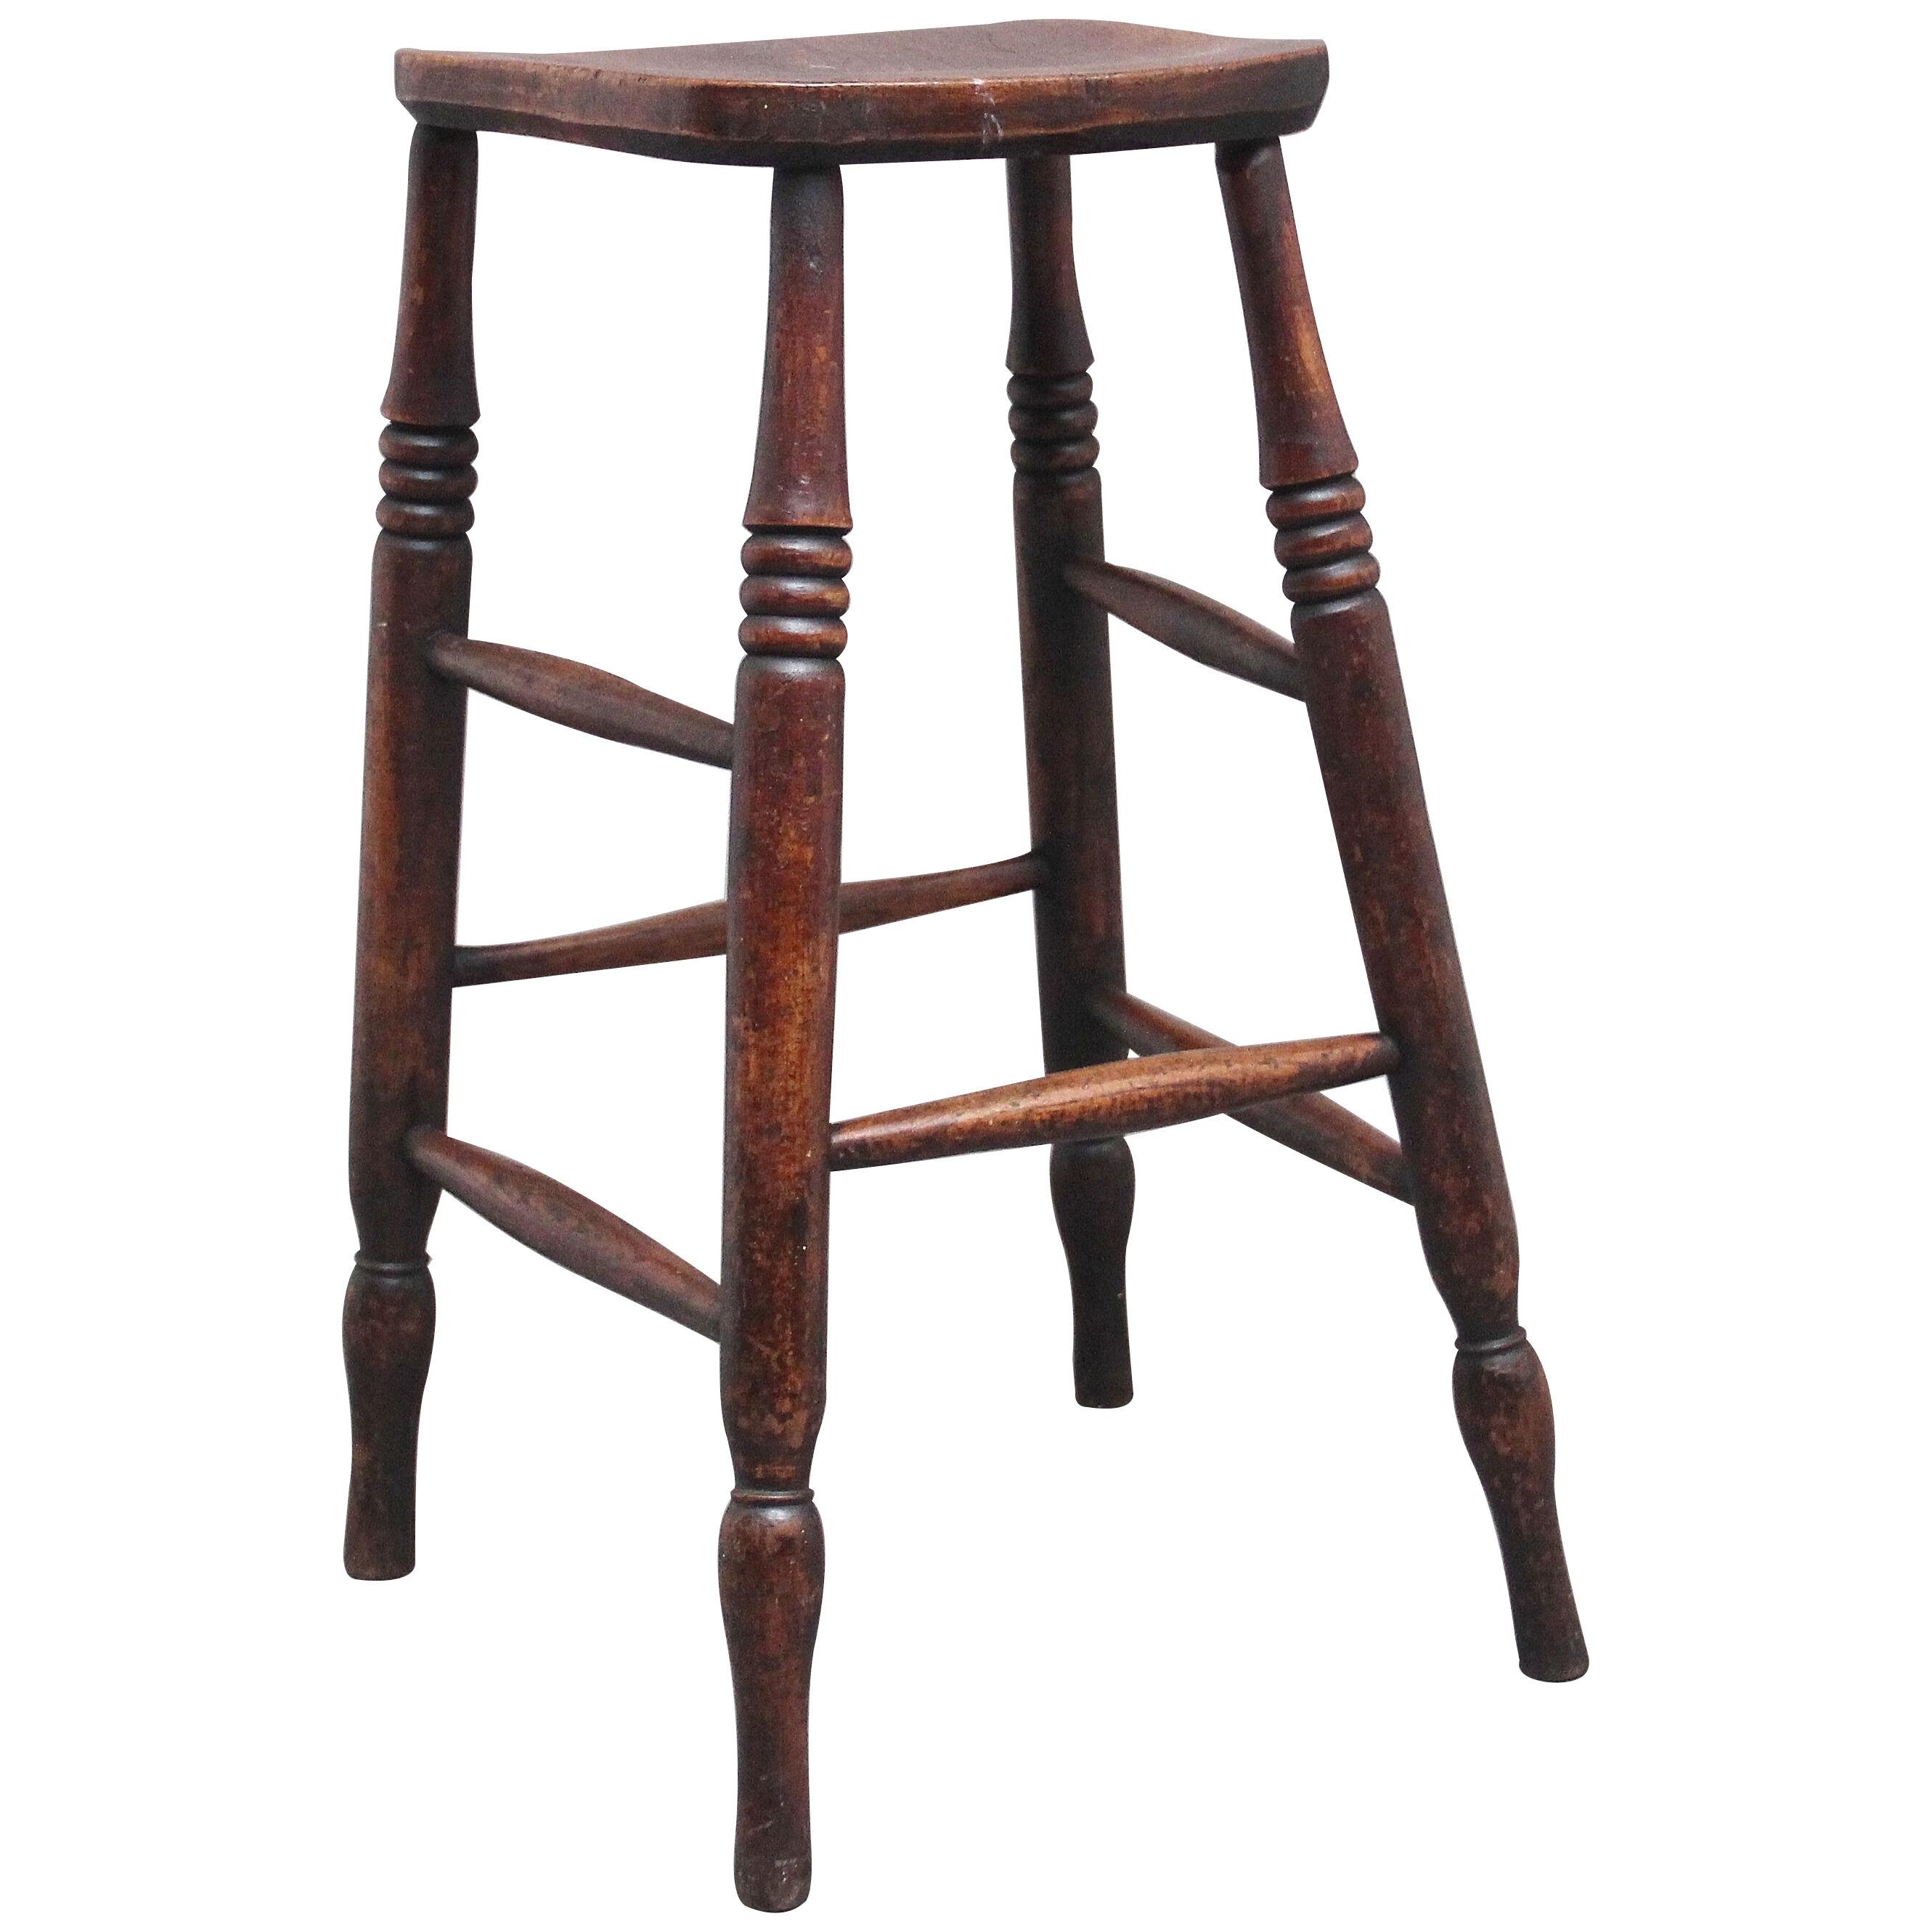 A tall mid 19th Century ash and elm stool